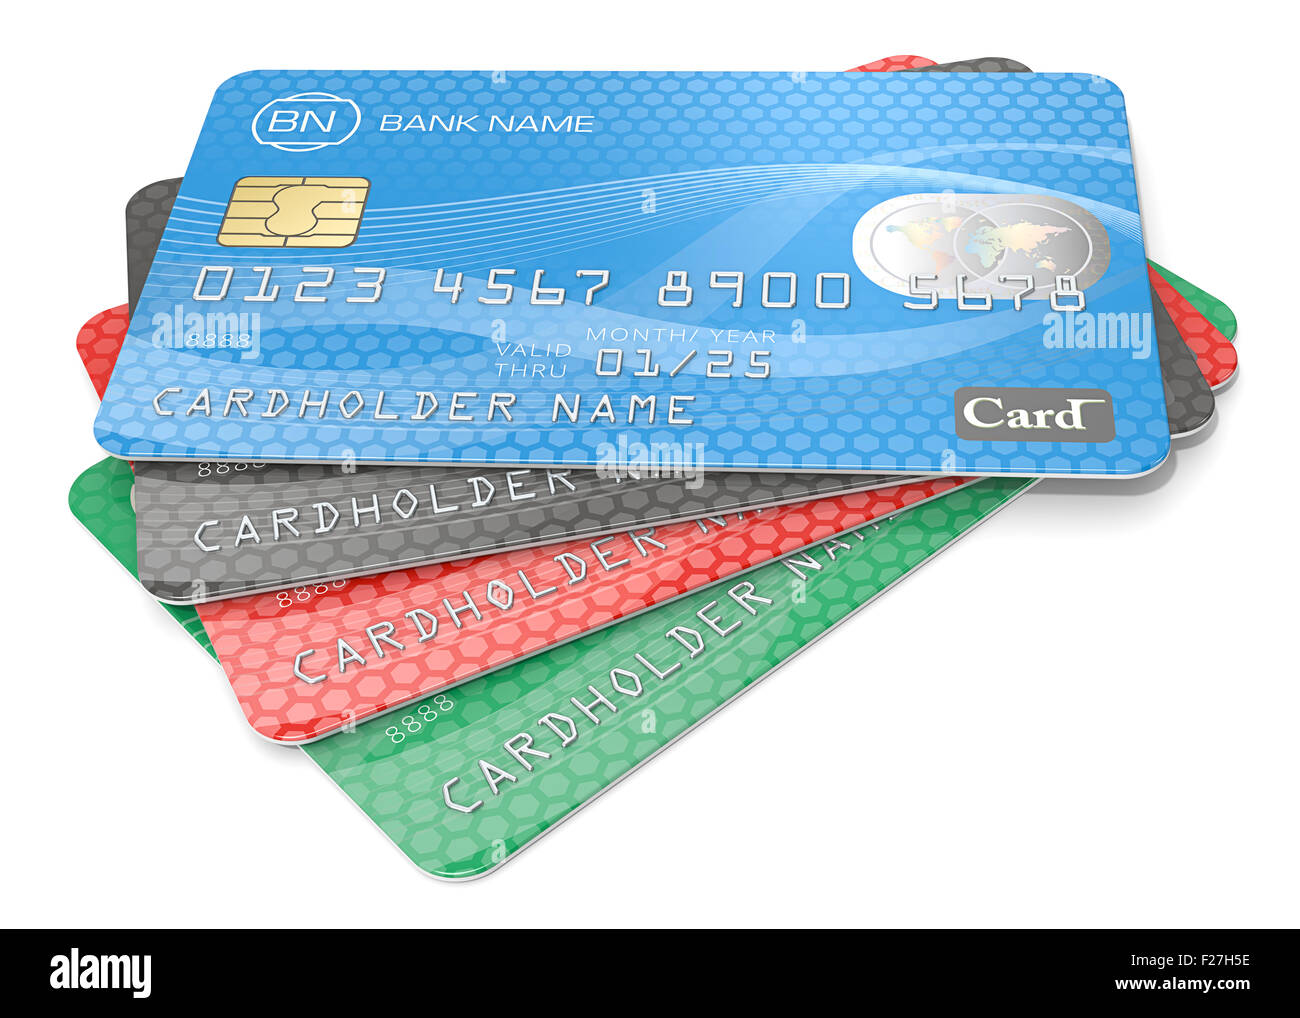 Pile of 4 Credit Cards. Blue, black red, green. Generic Names, Numbers and Logos. Stock Photo